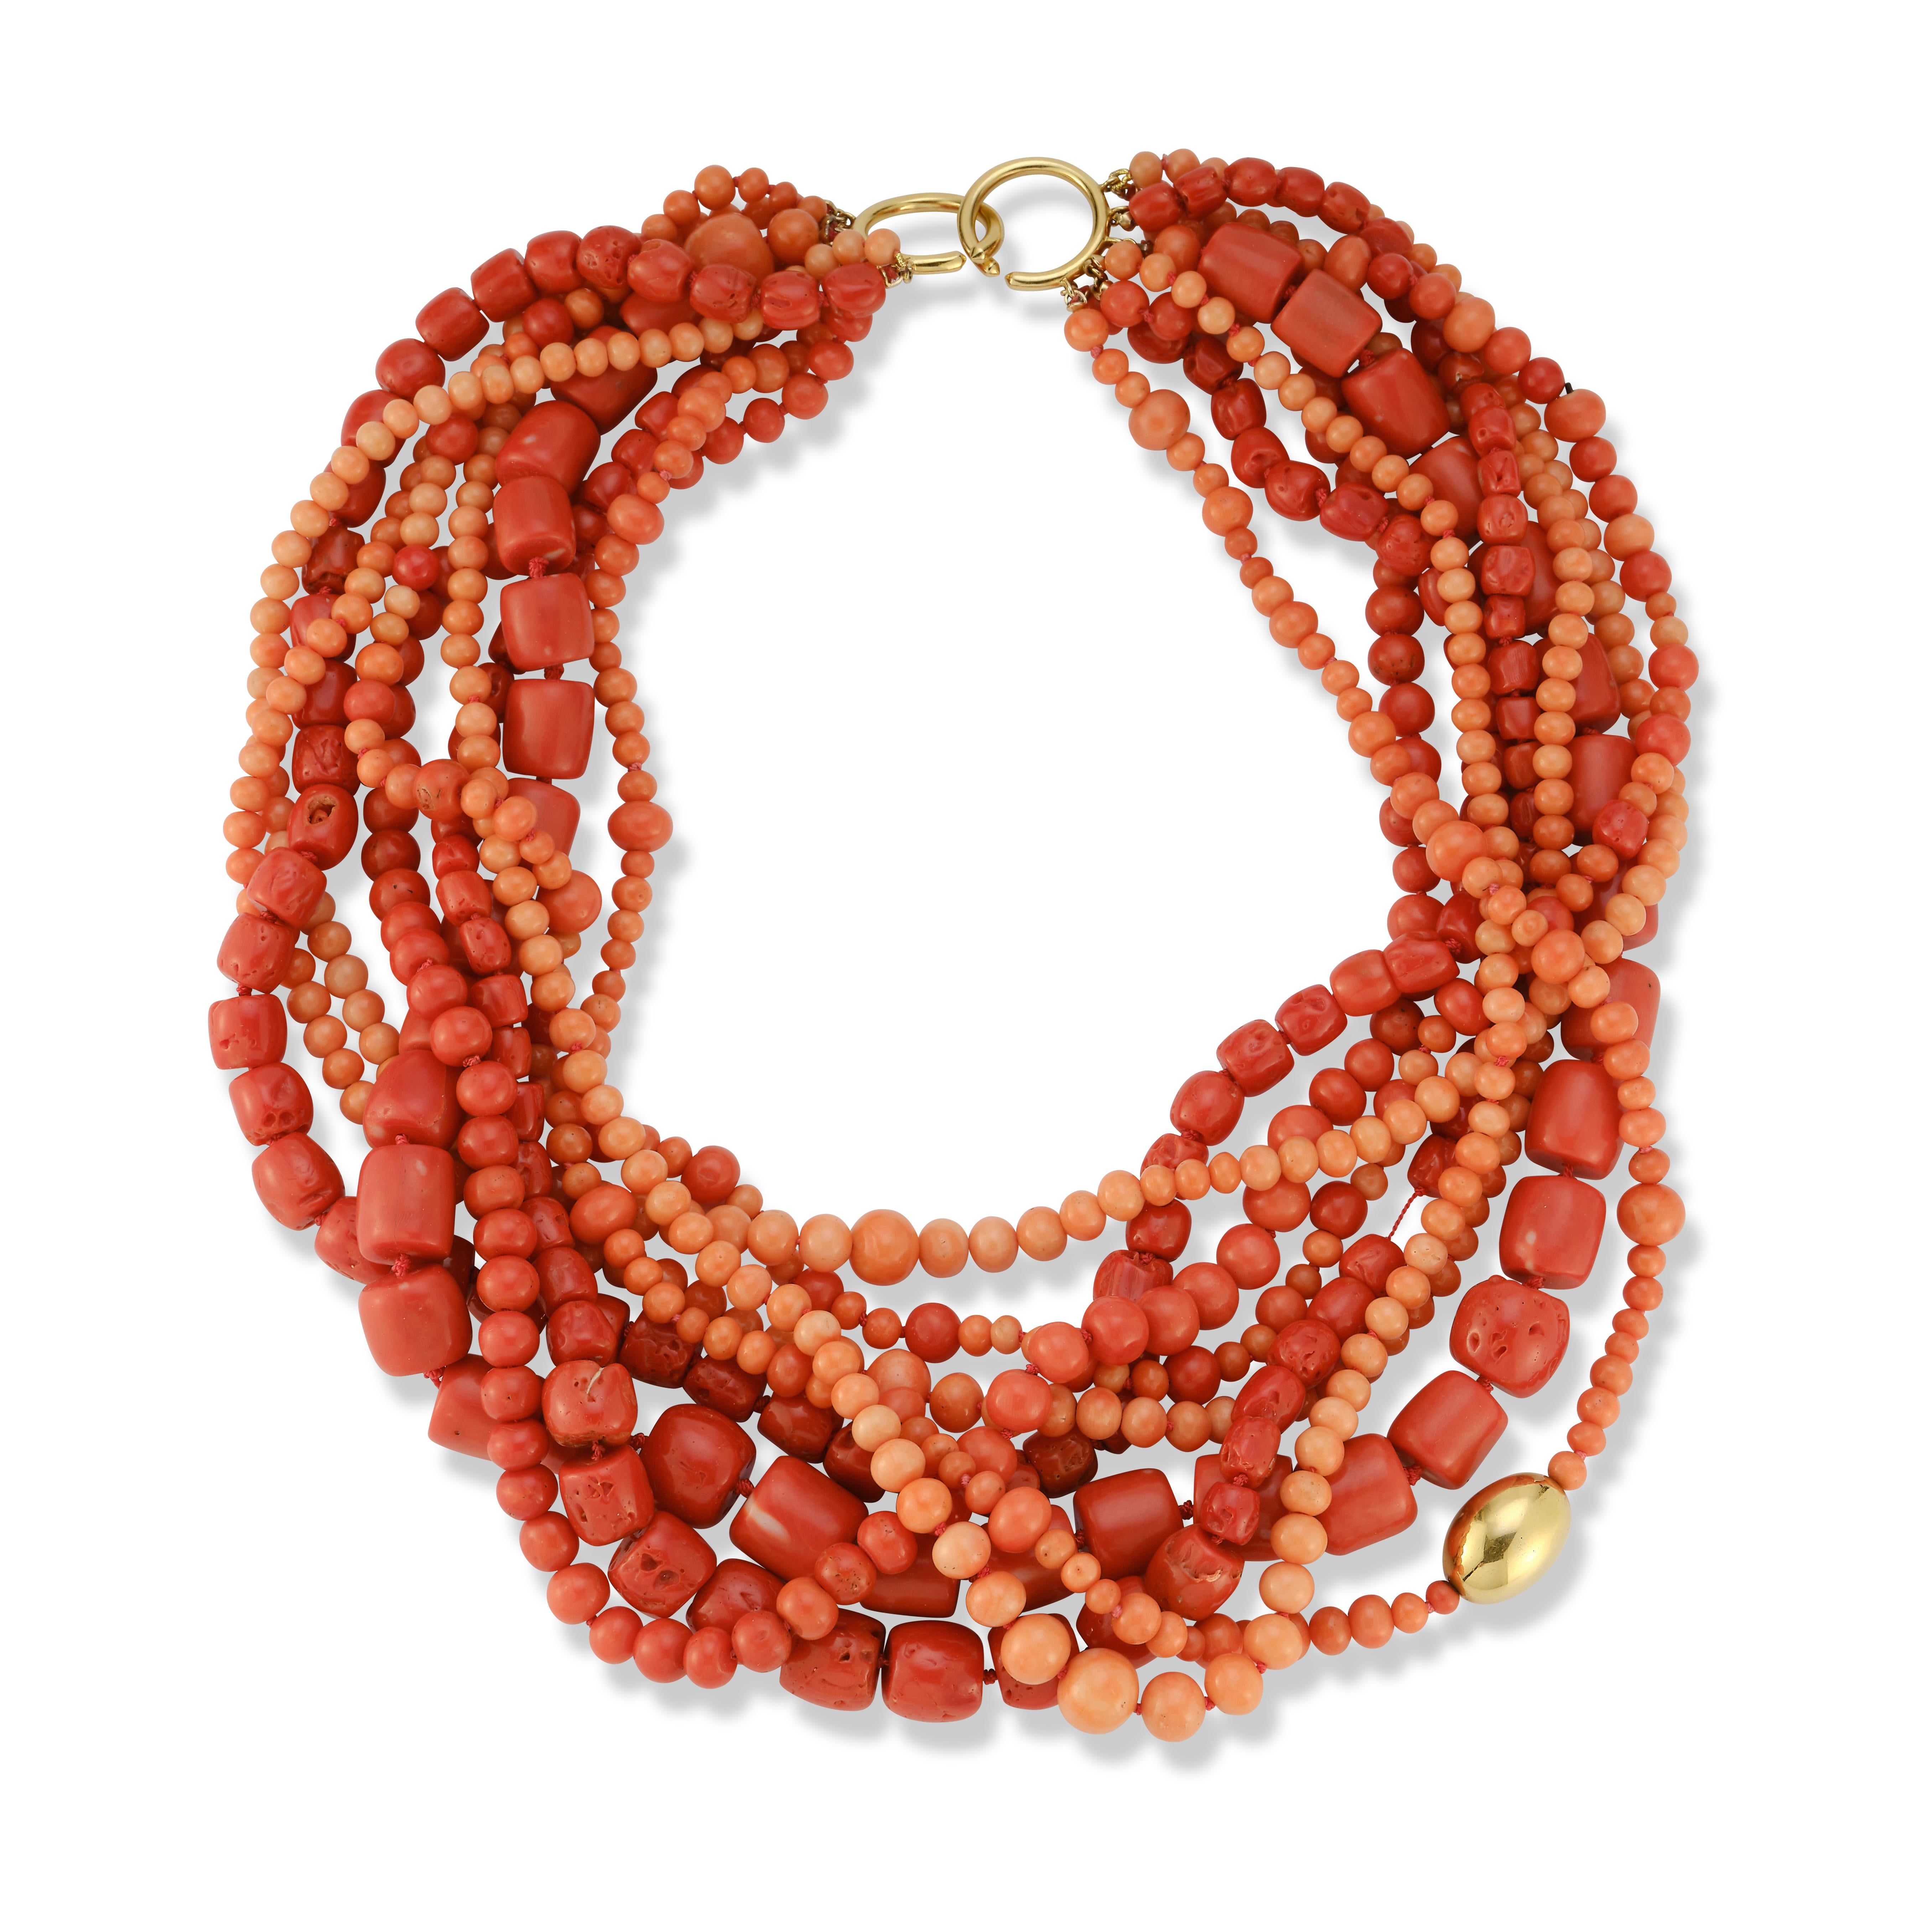 Paloma Picasso for Tiffany & Co. Multi Strand Coral Bead Necklace
 
9 strands of coral beads attached by an 18k gold clasp in a torsade design.

Signed: Paloma Picasso, Tiffany & Co.
Stamped: 1983, 18k

Length: 21